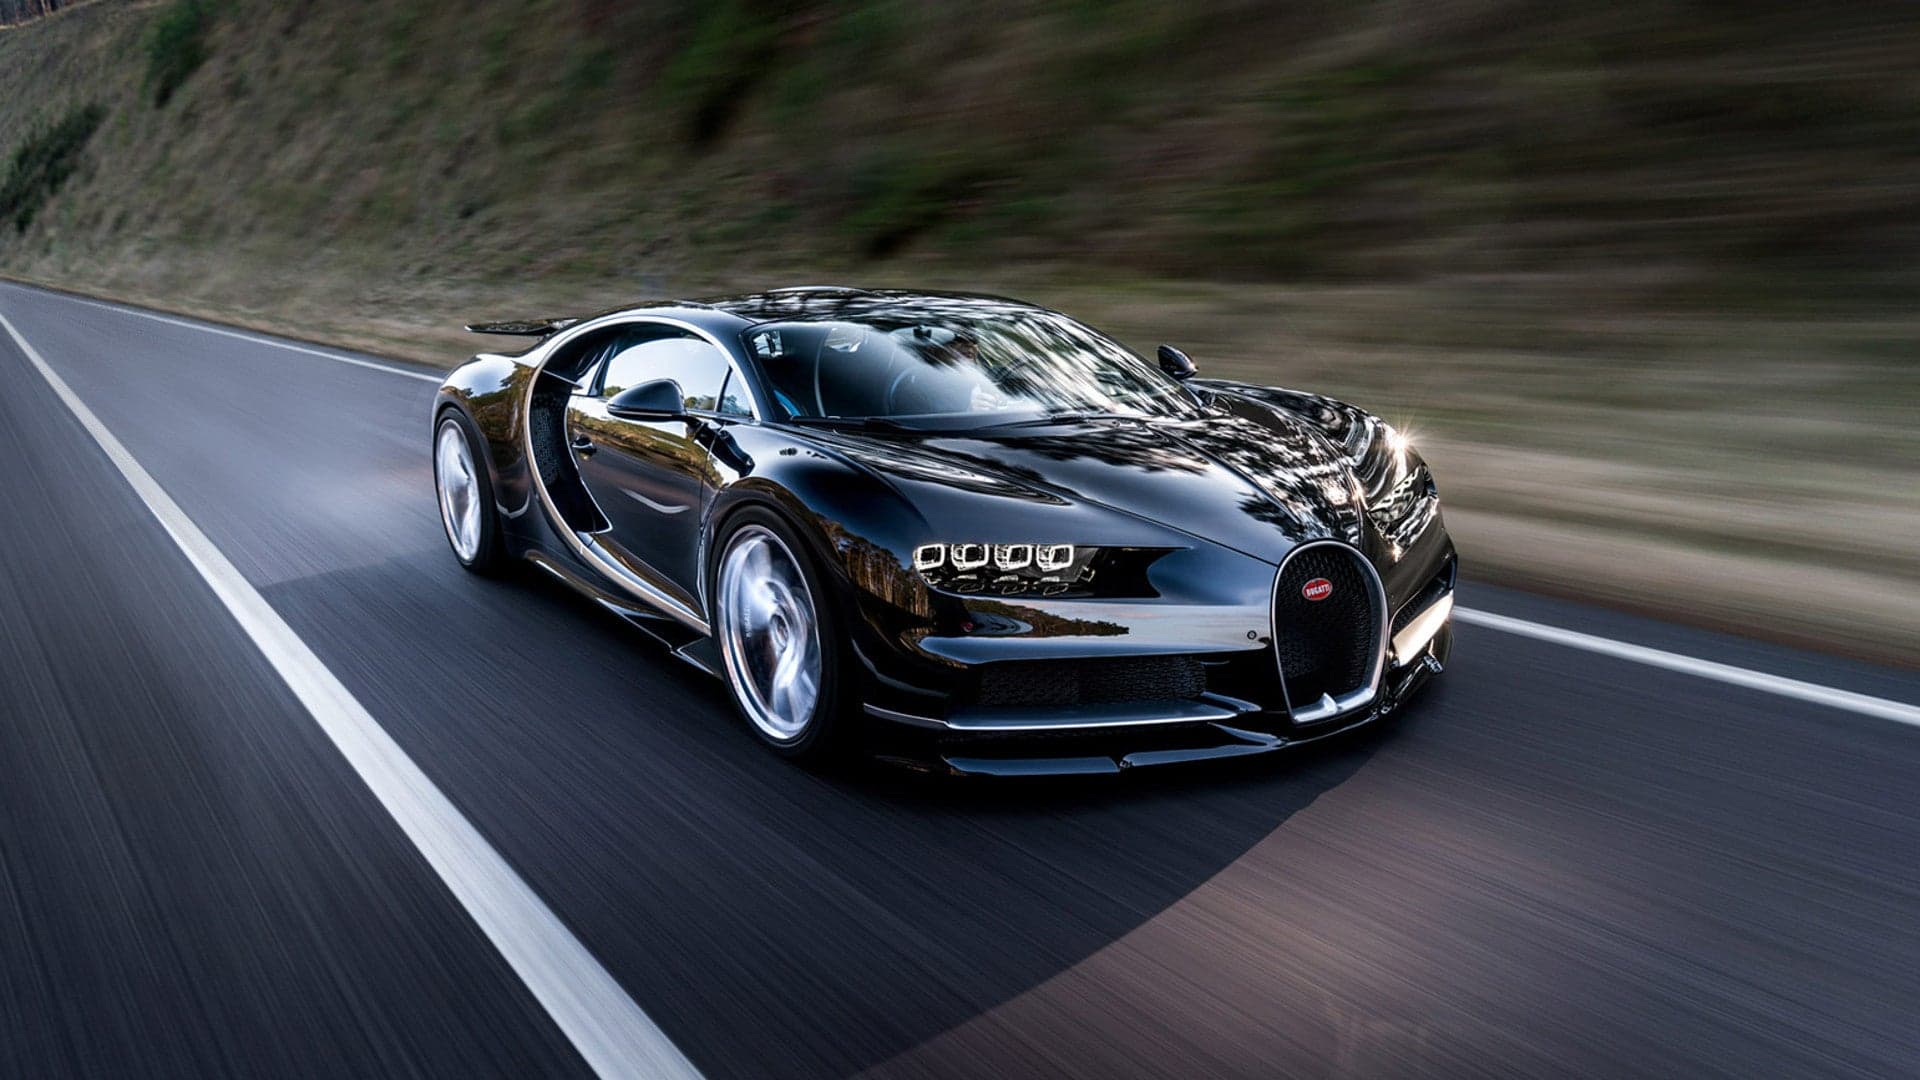 The 1,479-HP Bugatti Chiron Could Hit 280 MPH… If the Tires Can Keep Up